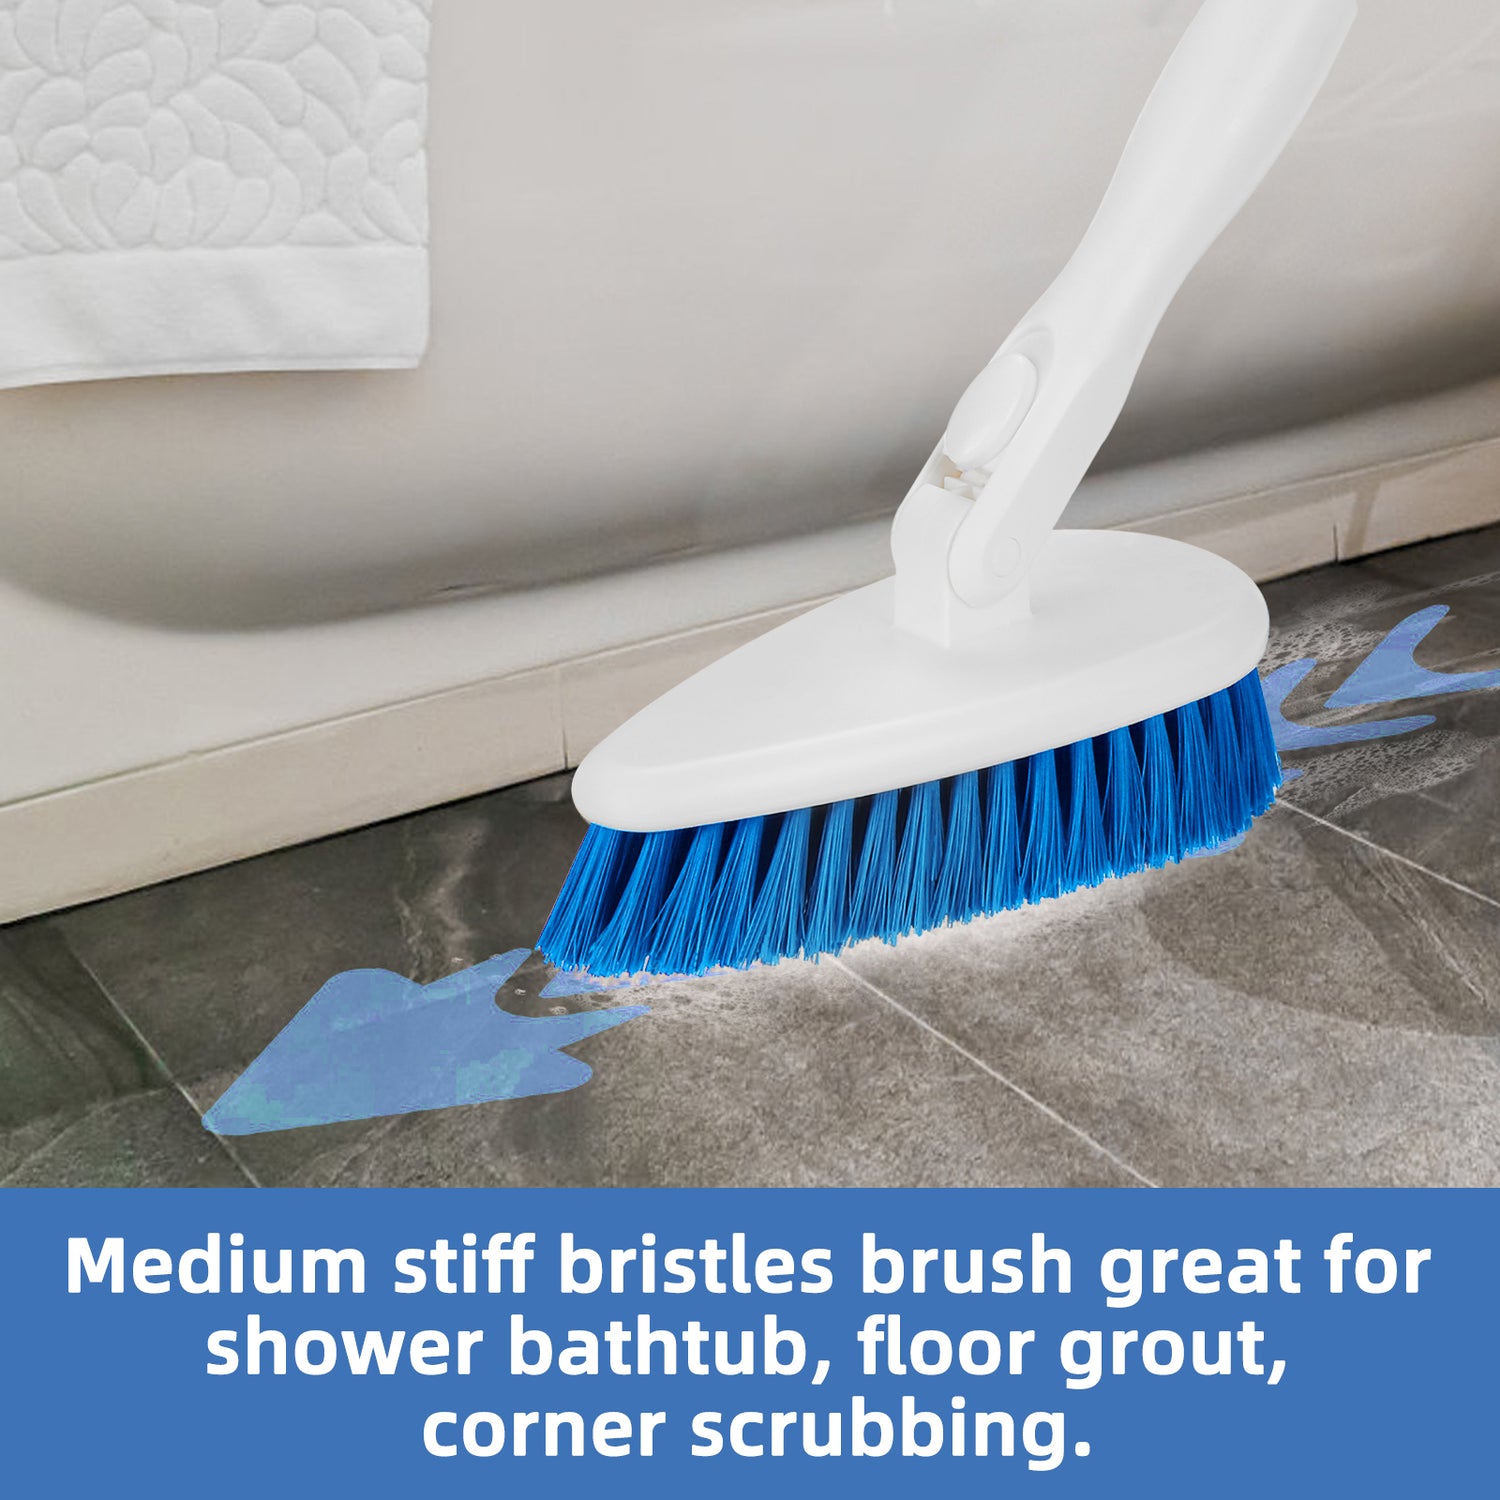 Qaestfy Baseboard Cleaner Tool with Handle, Wall Floor Mop with